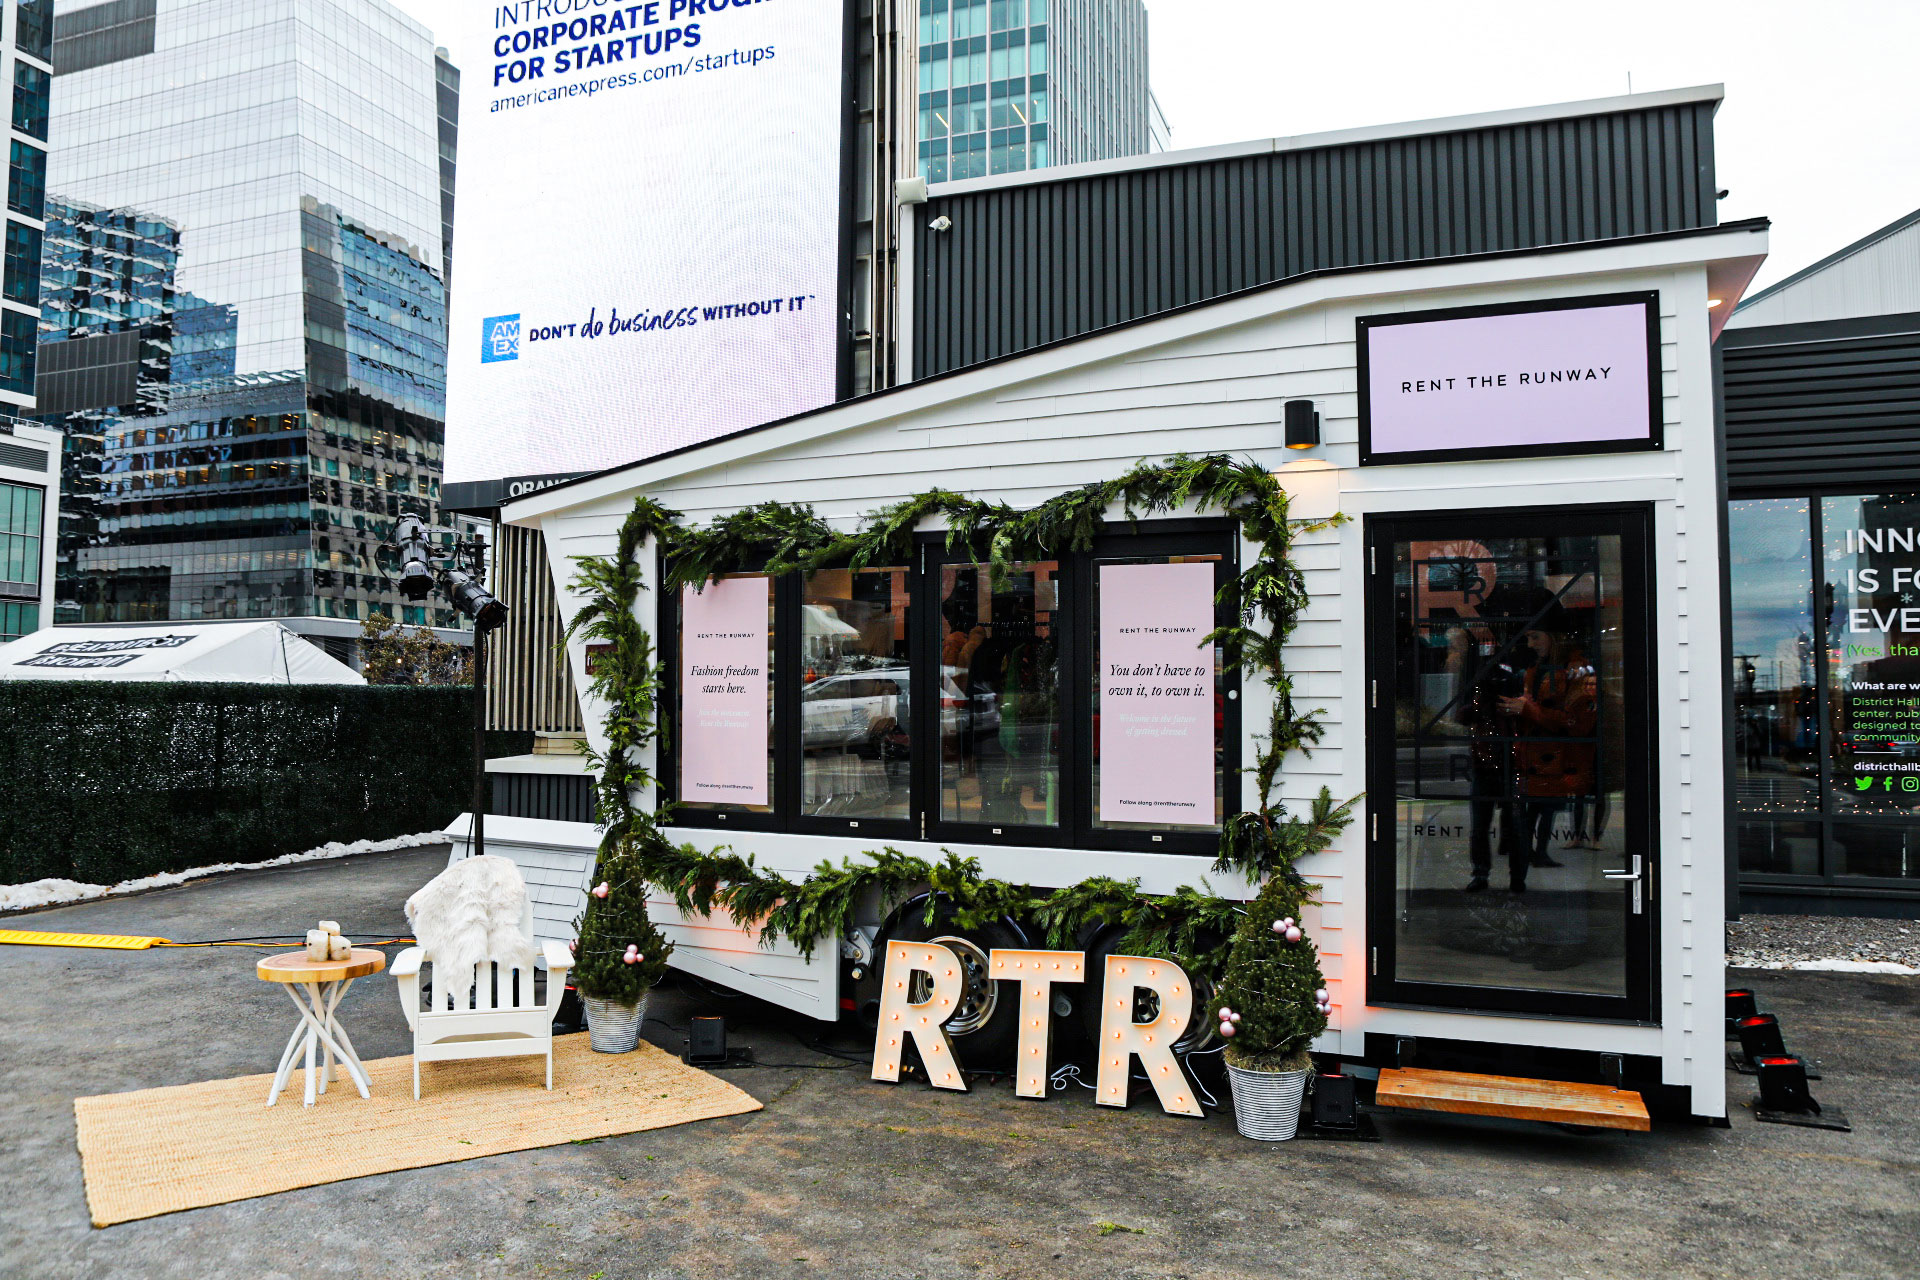 Mobile Business Trailer, Pop Up Space